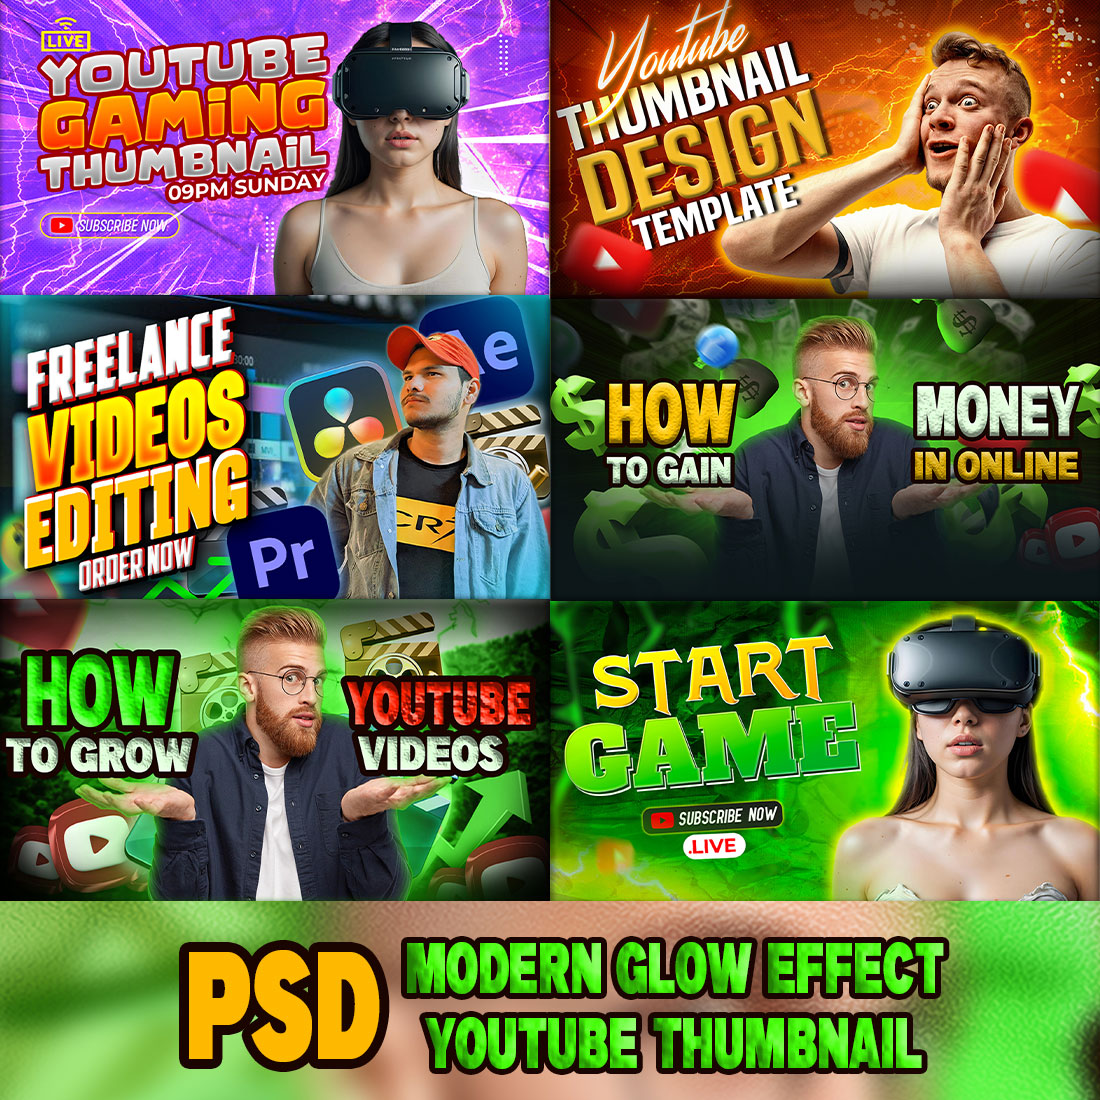 PSD Modern glow effect youtube video thumbnail template design fully editable preview image.